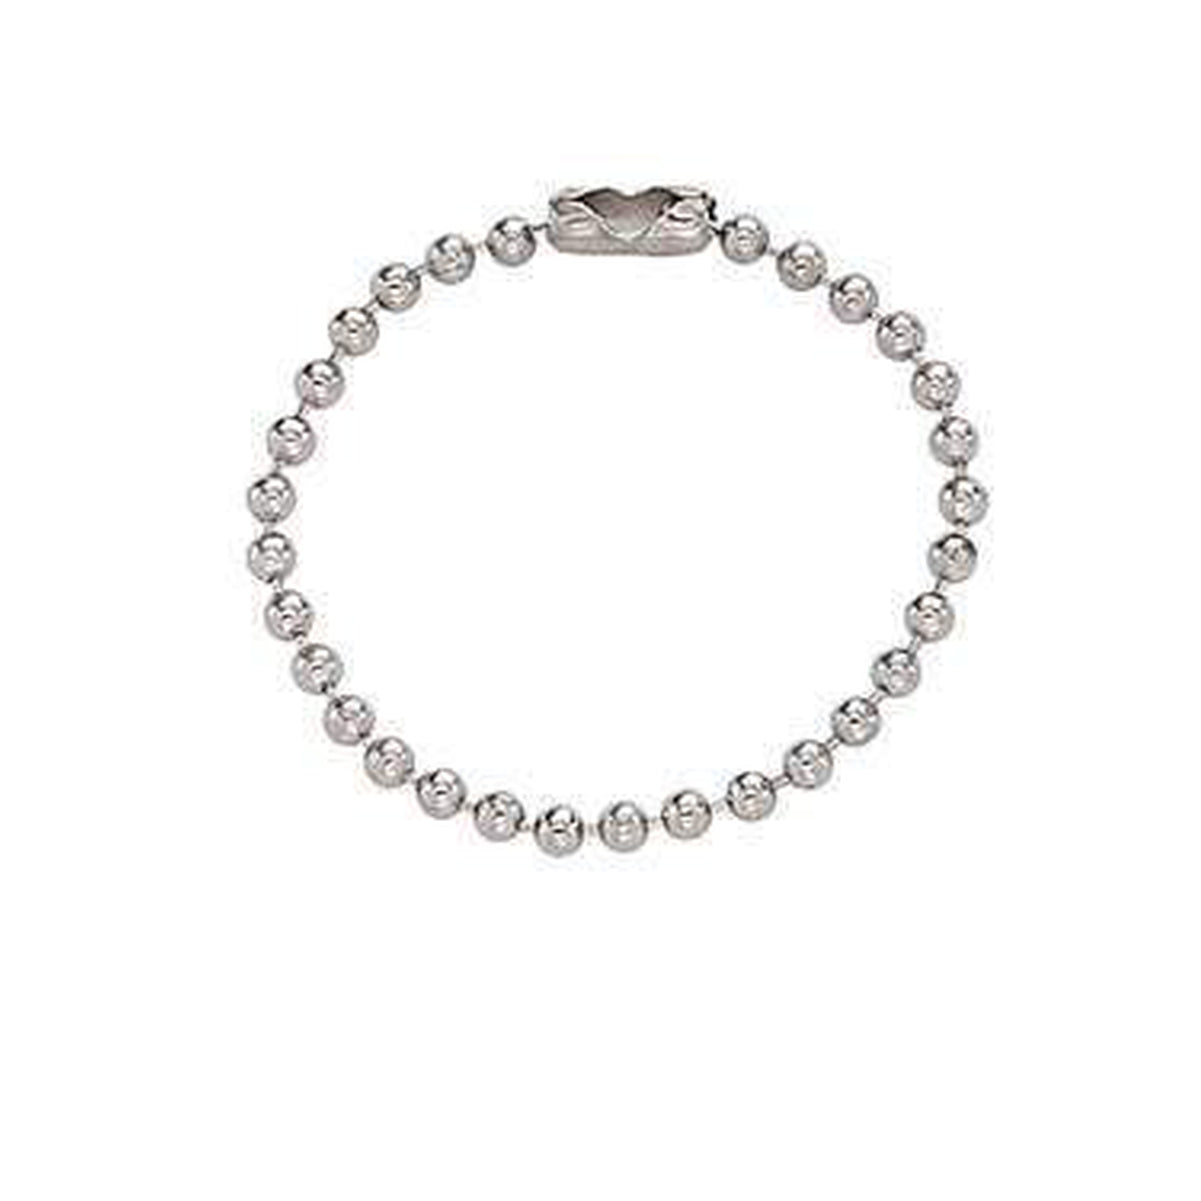 Nickel-Plated Steel Ball Chain, 4", No. 3 Bead Size (P/N 2450-1050) 2450-1050